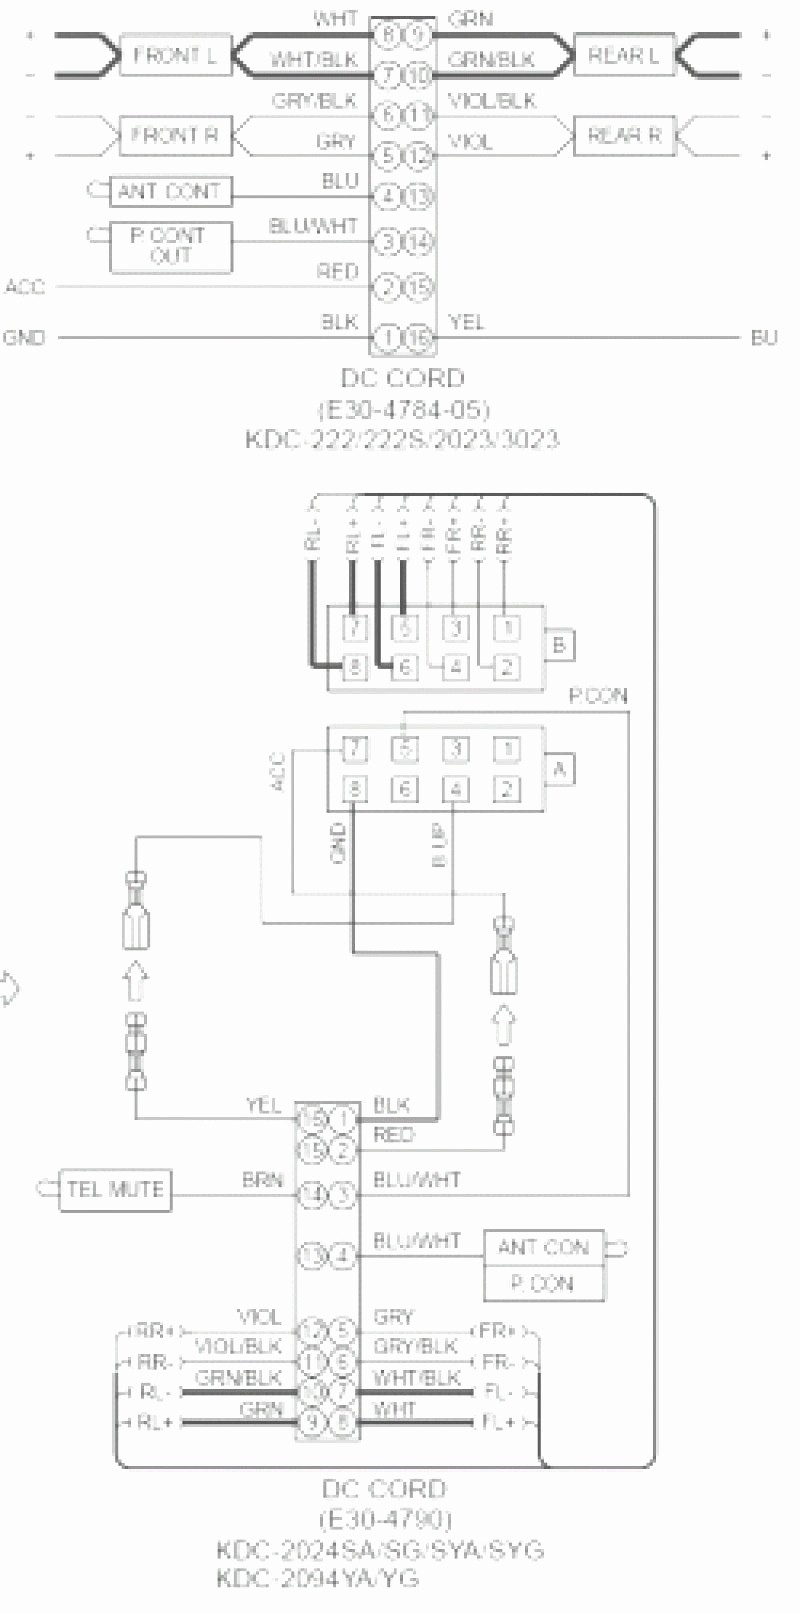 Kenwood Dnx5120 Wiring Diagram from mainetreasurechest.com